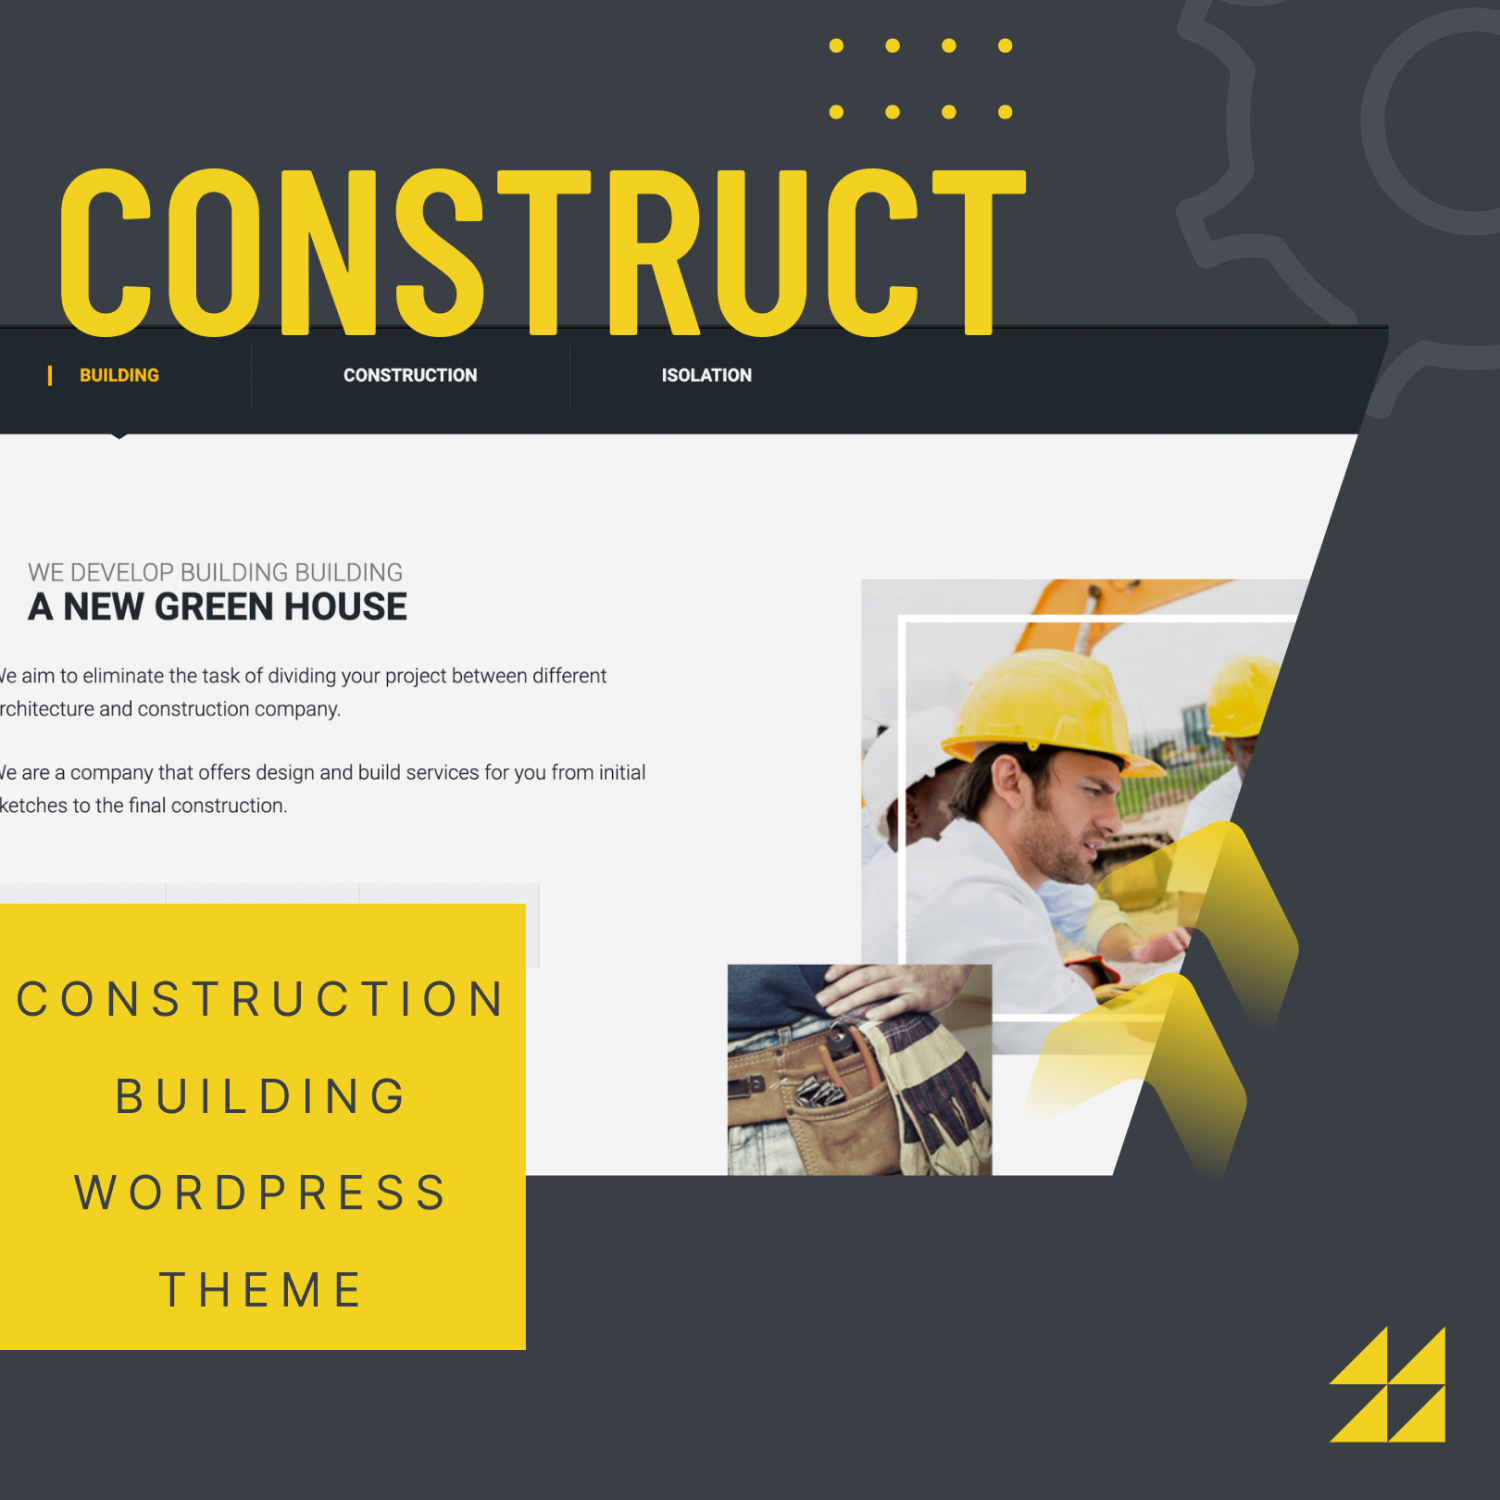 Preview images of the template on the topic of construction.